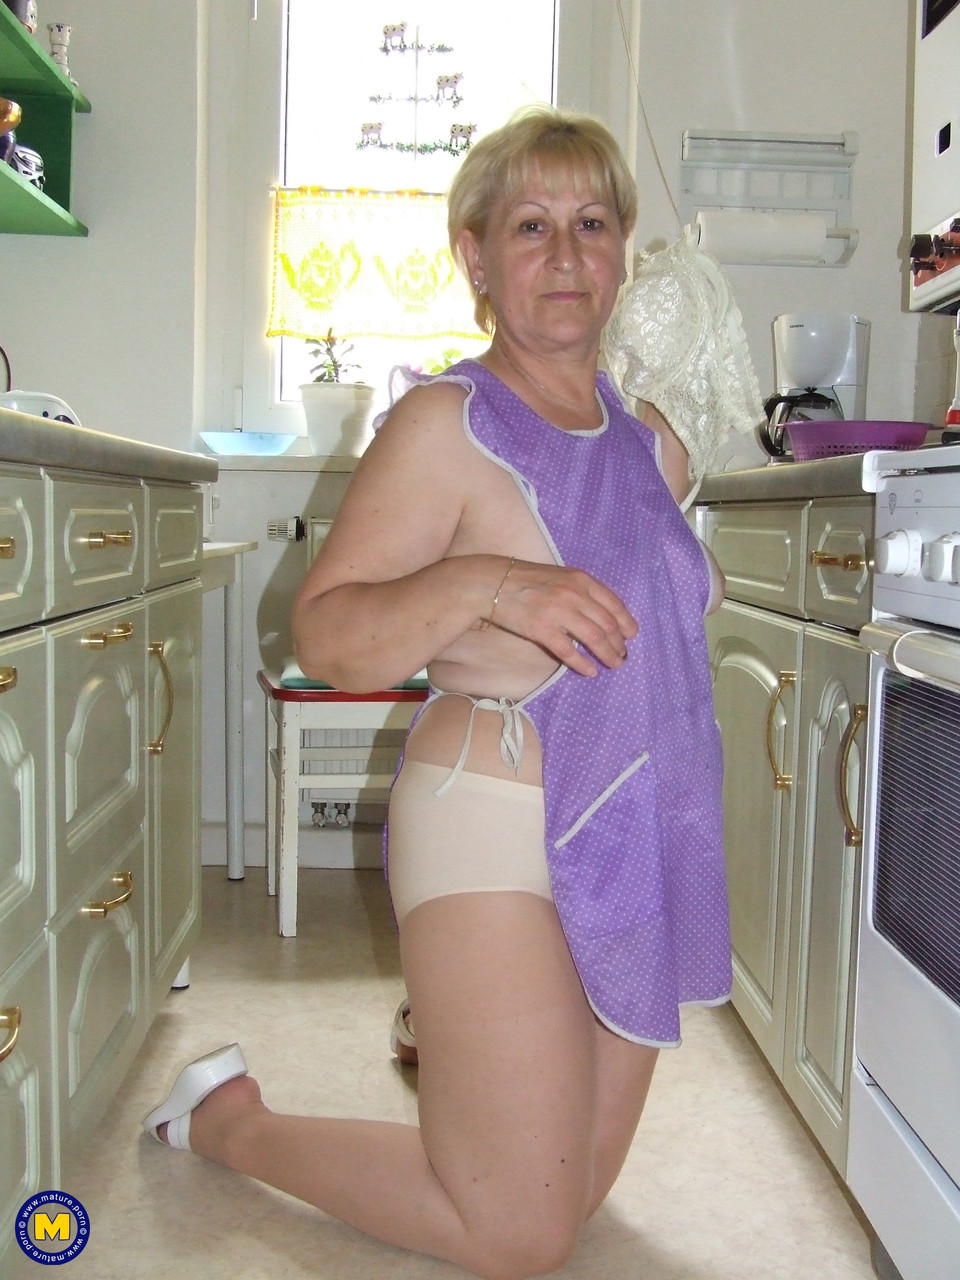 Short haired German cleaning lady Dagmar shows her mature cunt in the kitchen foto porno #425226963 | Mature NL Pics, Dagmar, German, porno móvil